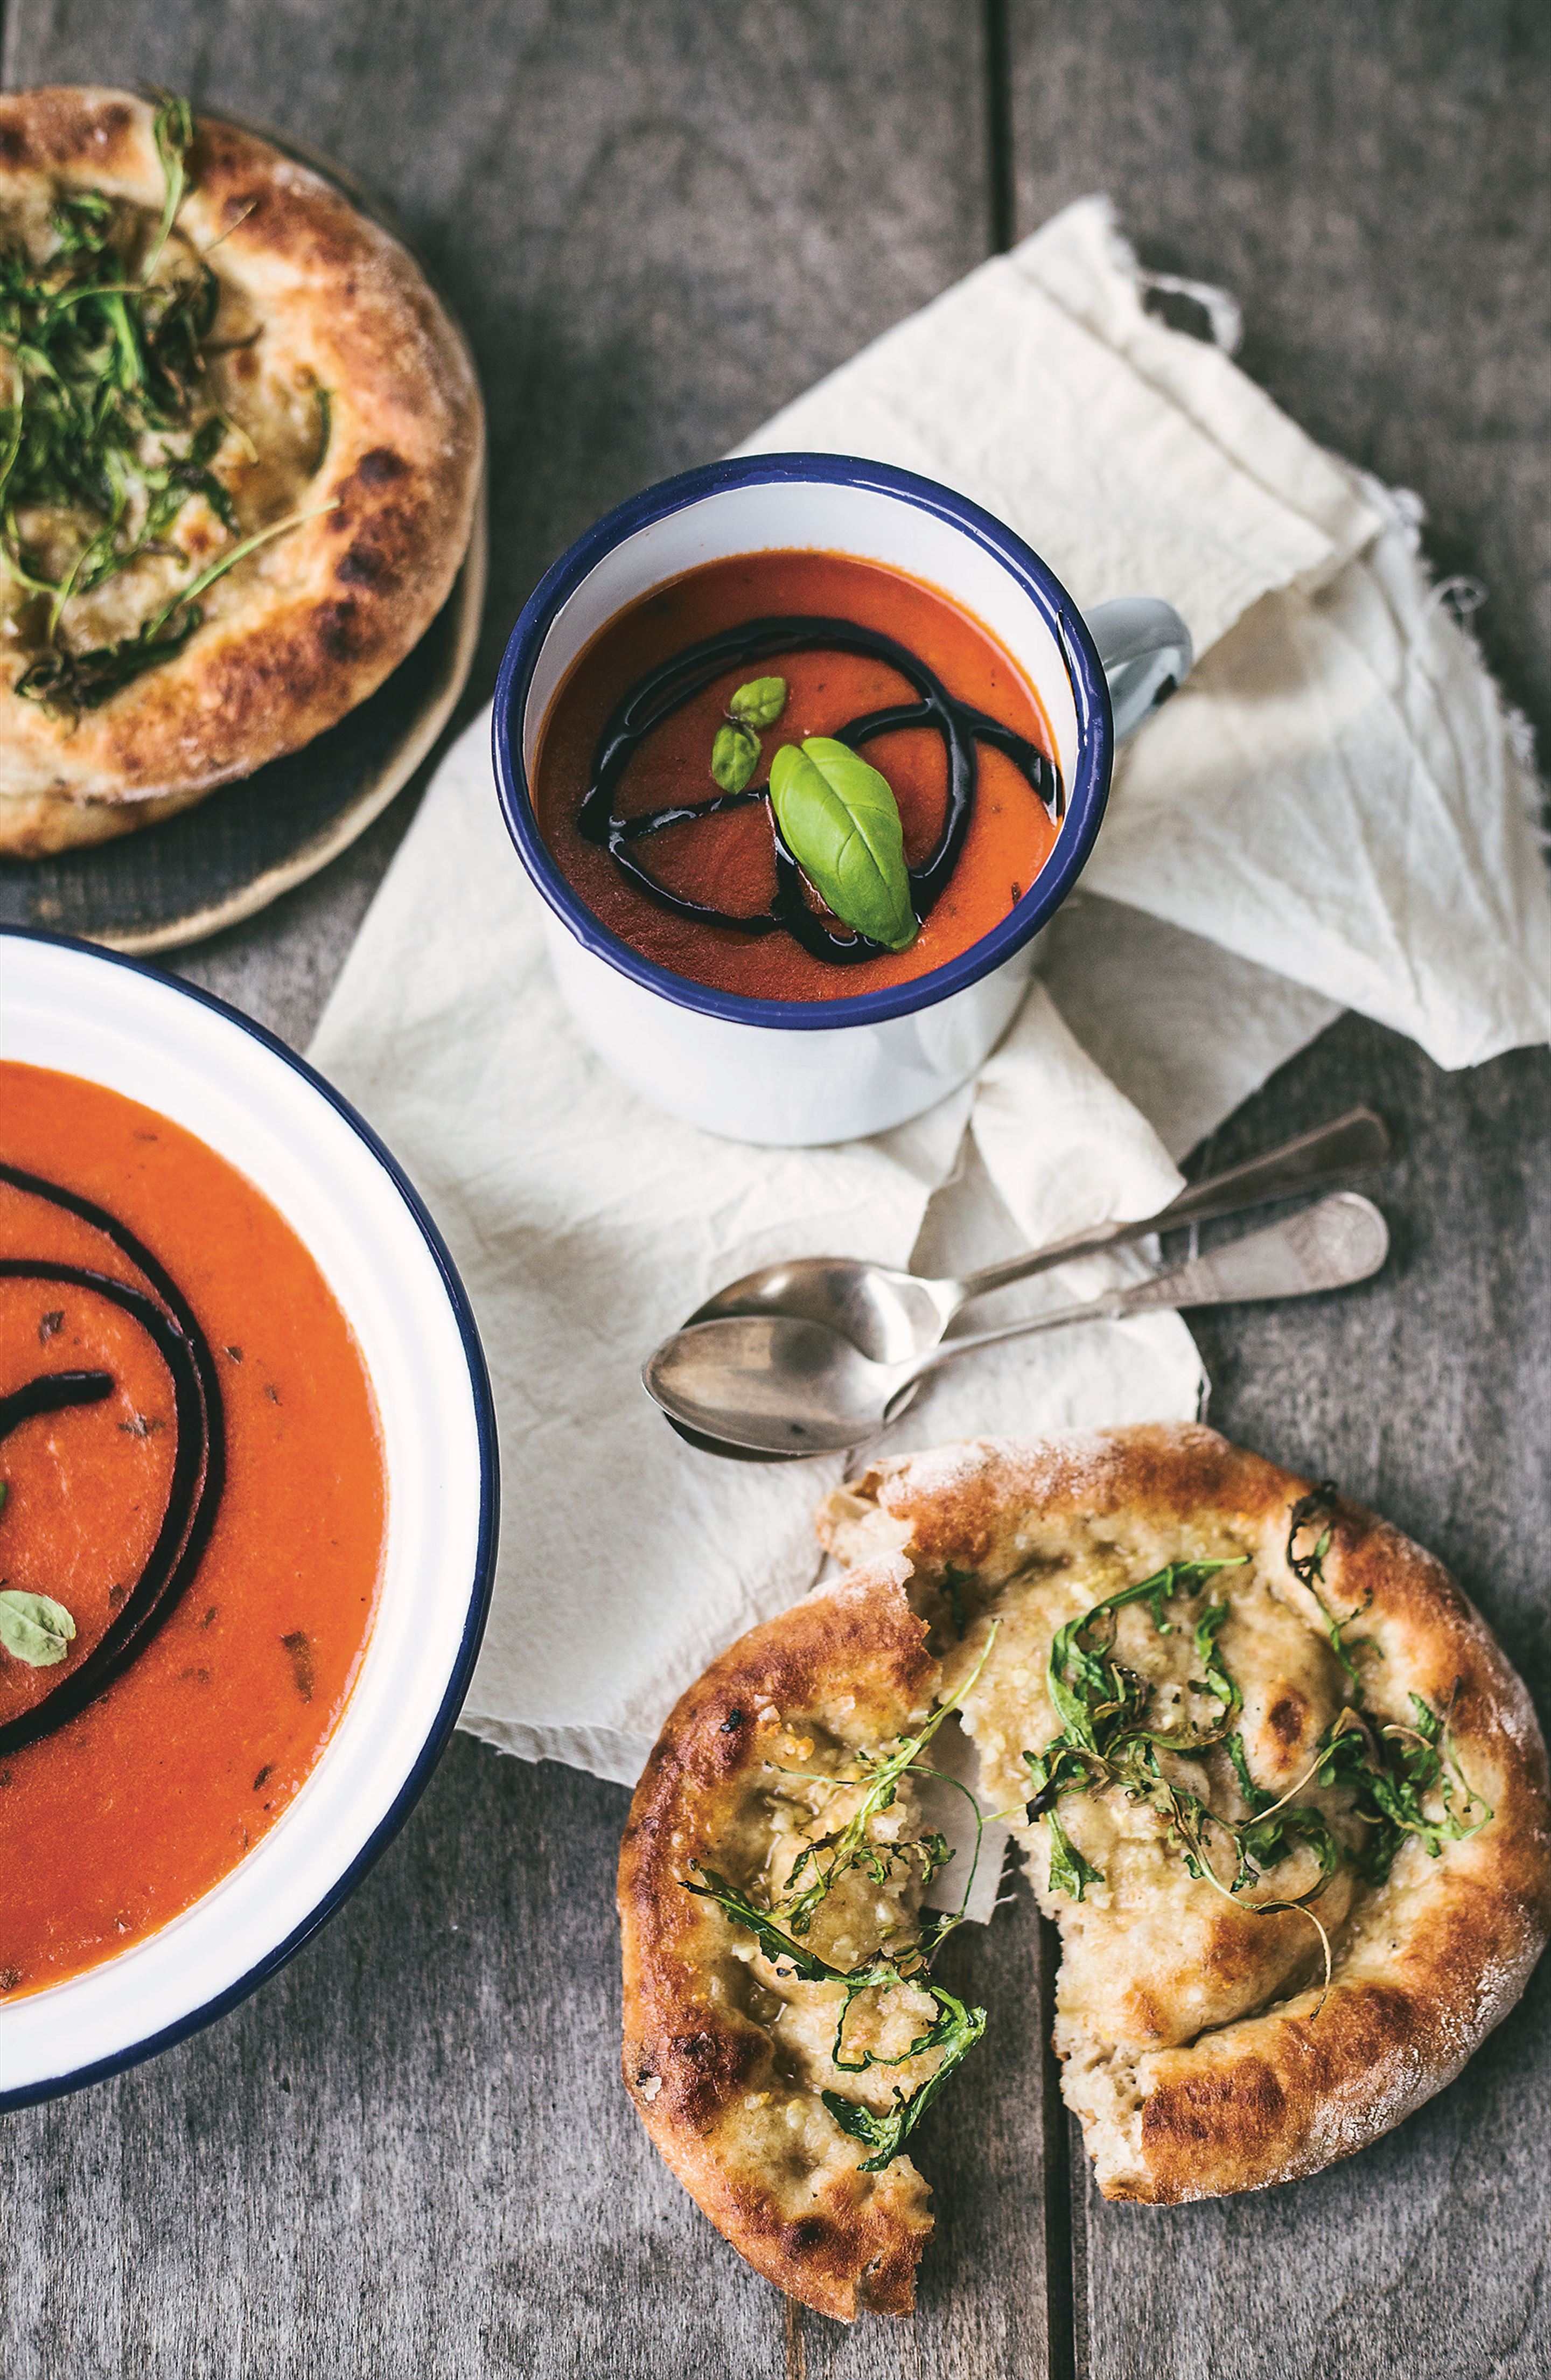 Tomato soup with garlic and pizzette